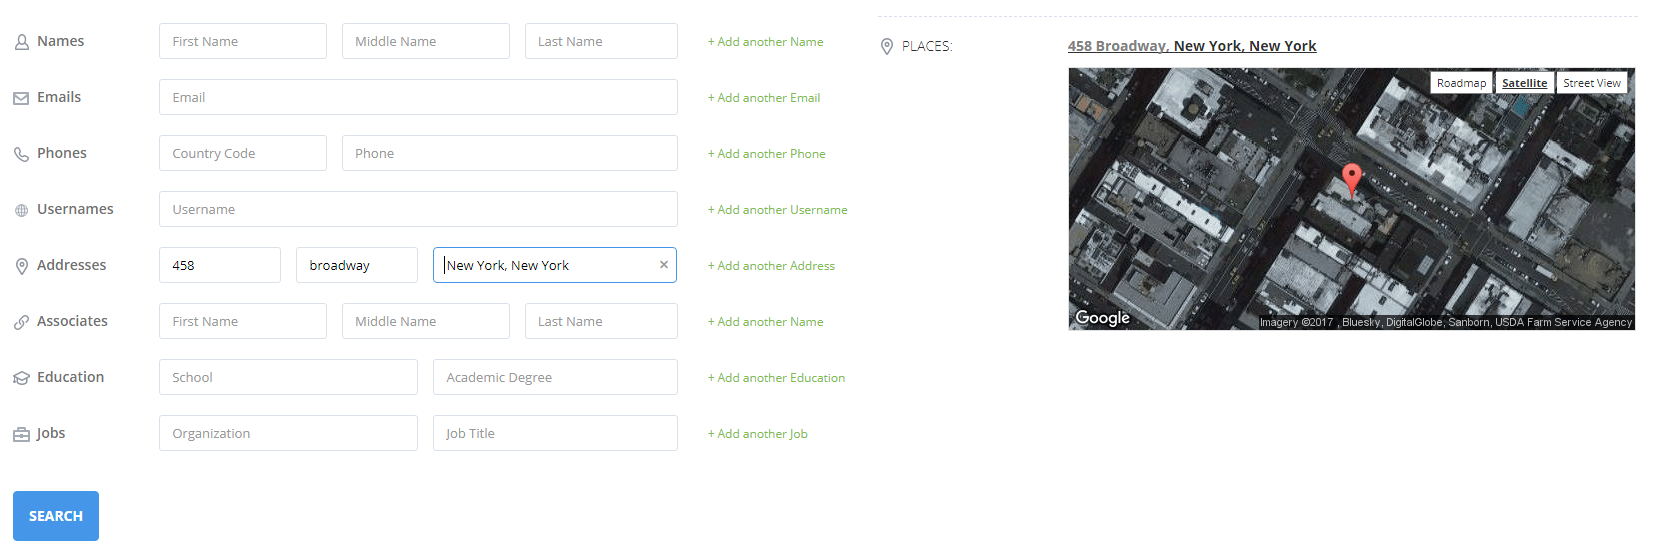 Searching by Address in Pipl SEARCH